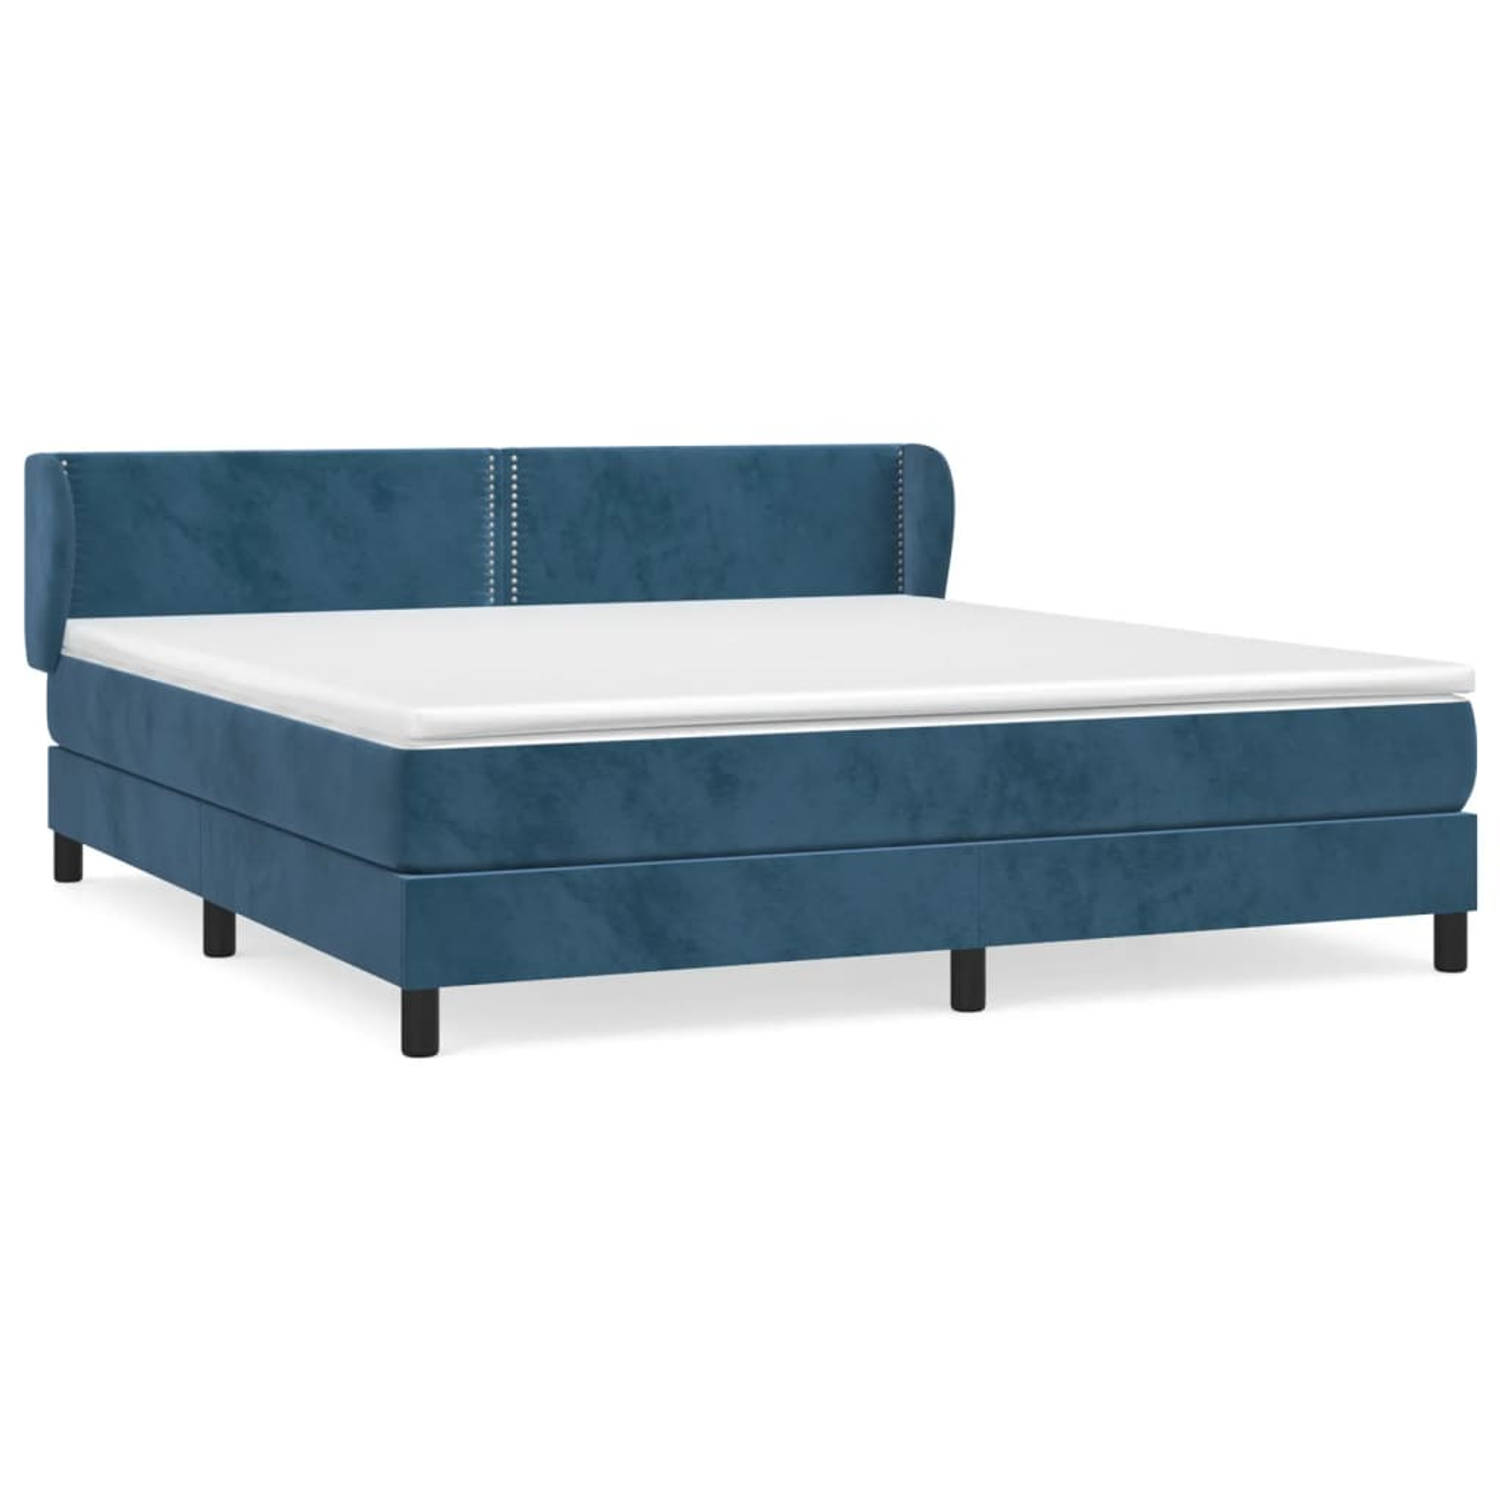 The Living Store Boxspringbed - Comfort - Bed - 203 x 183 x 78/88 cm - Donkerblauw